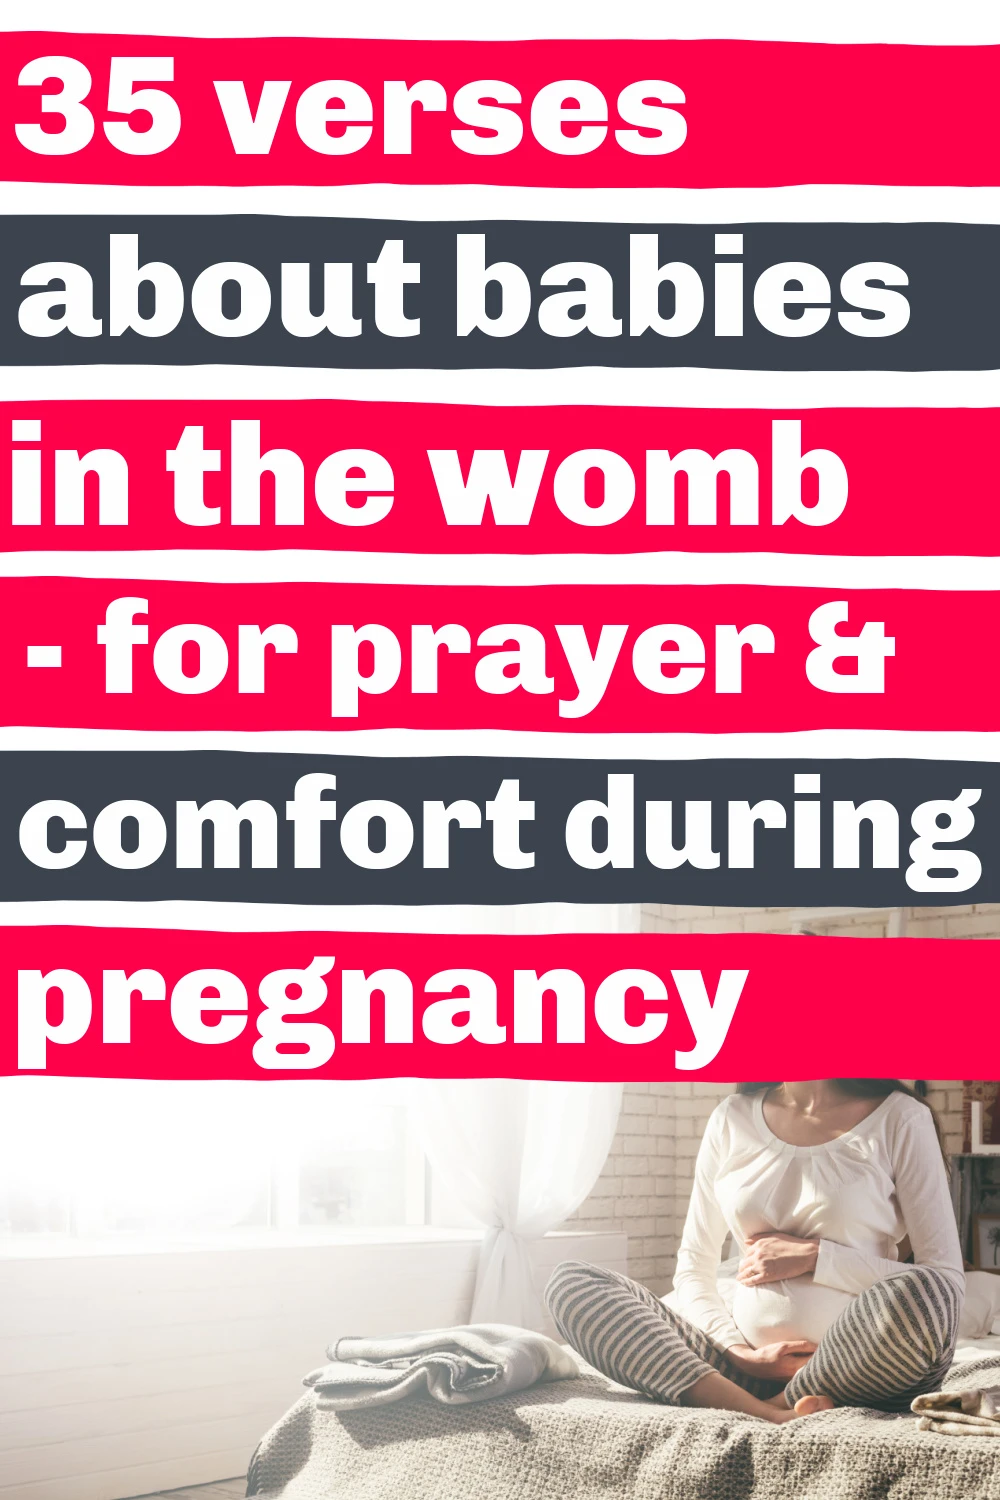 pregnant woman sitting on bed, meditating on Bible verses about babies in the womb